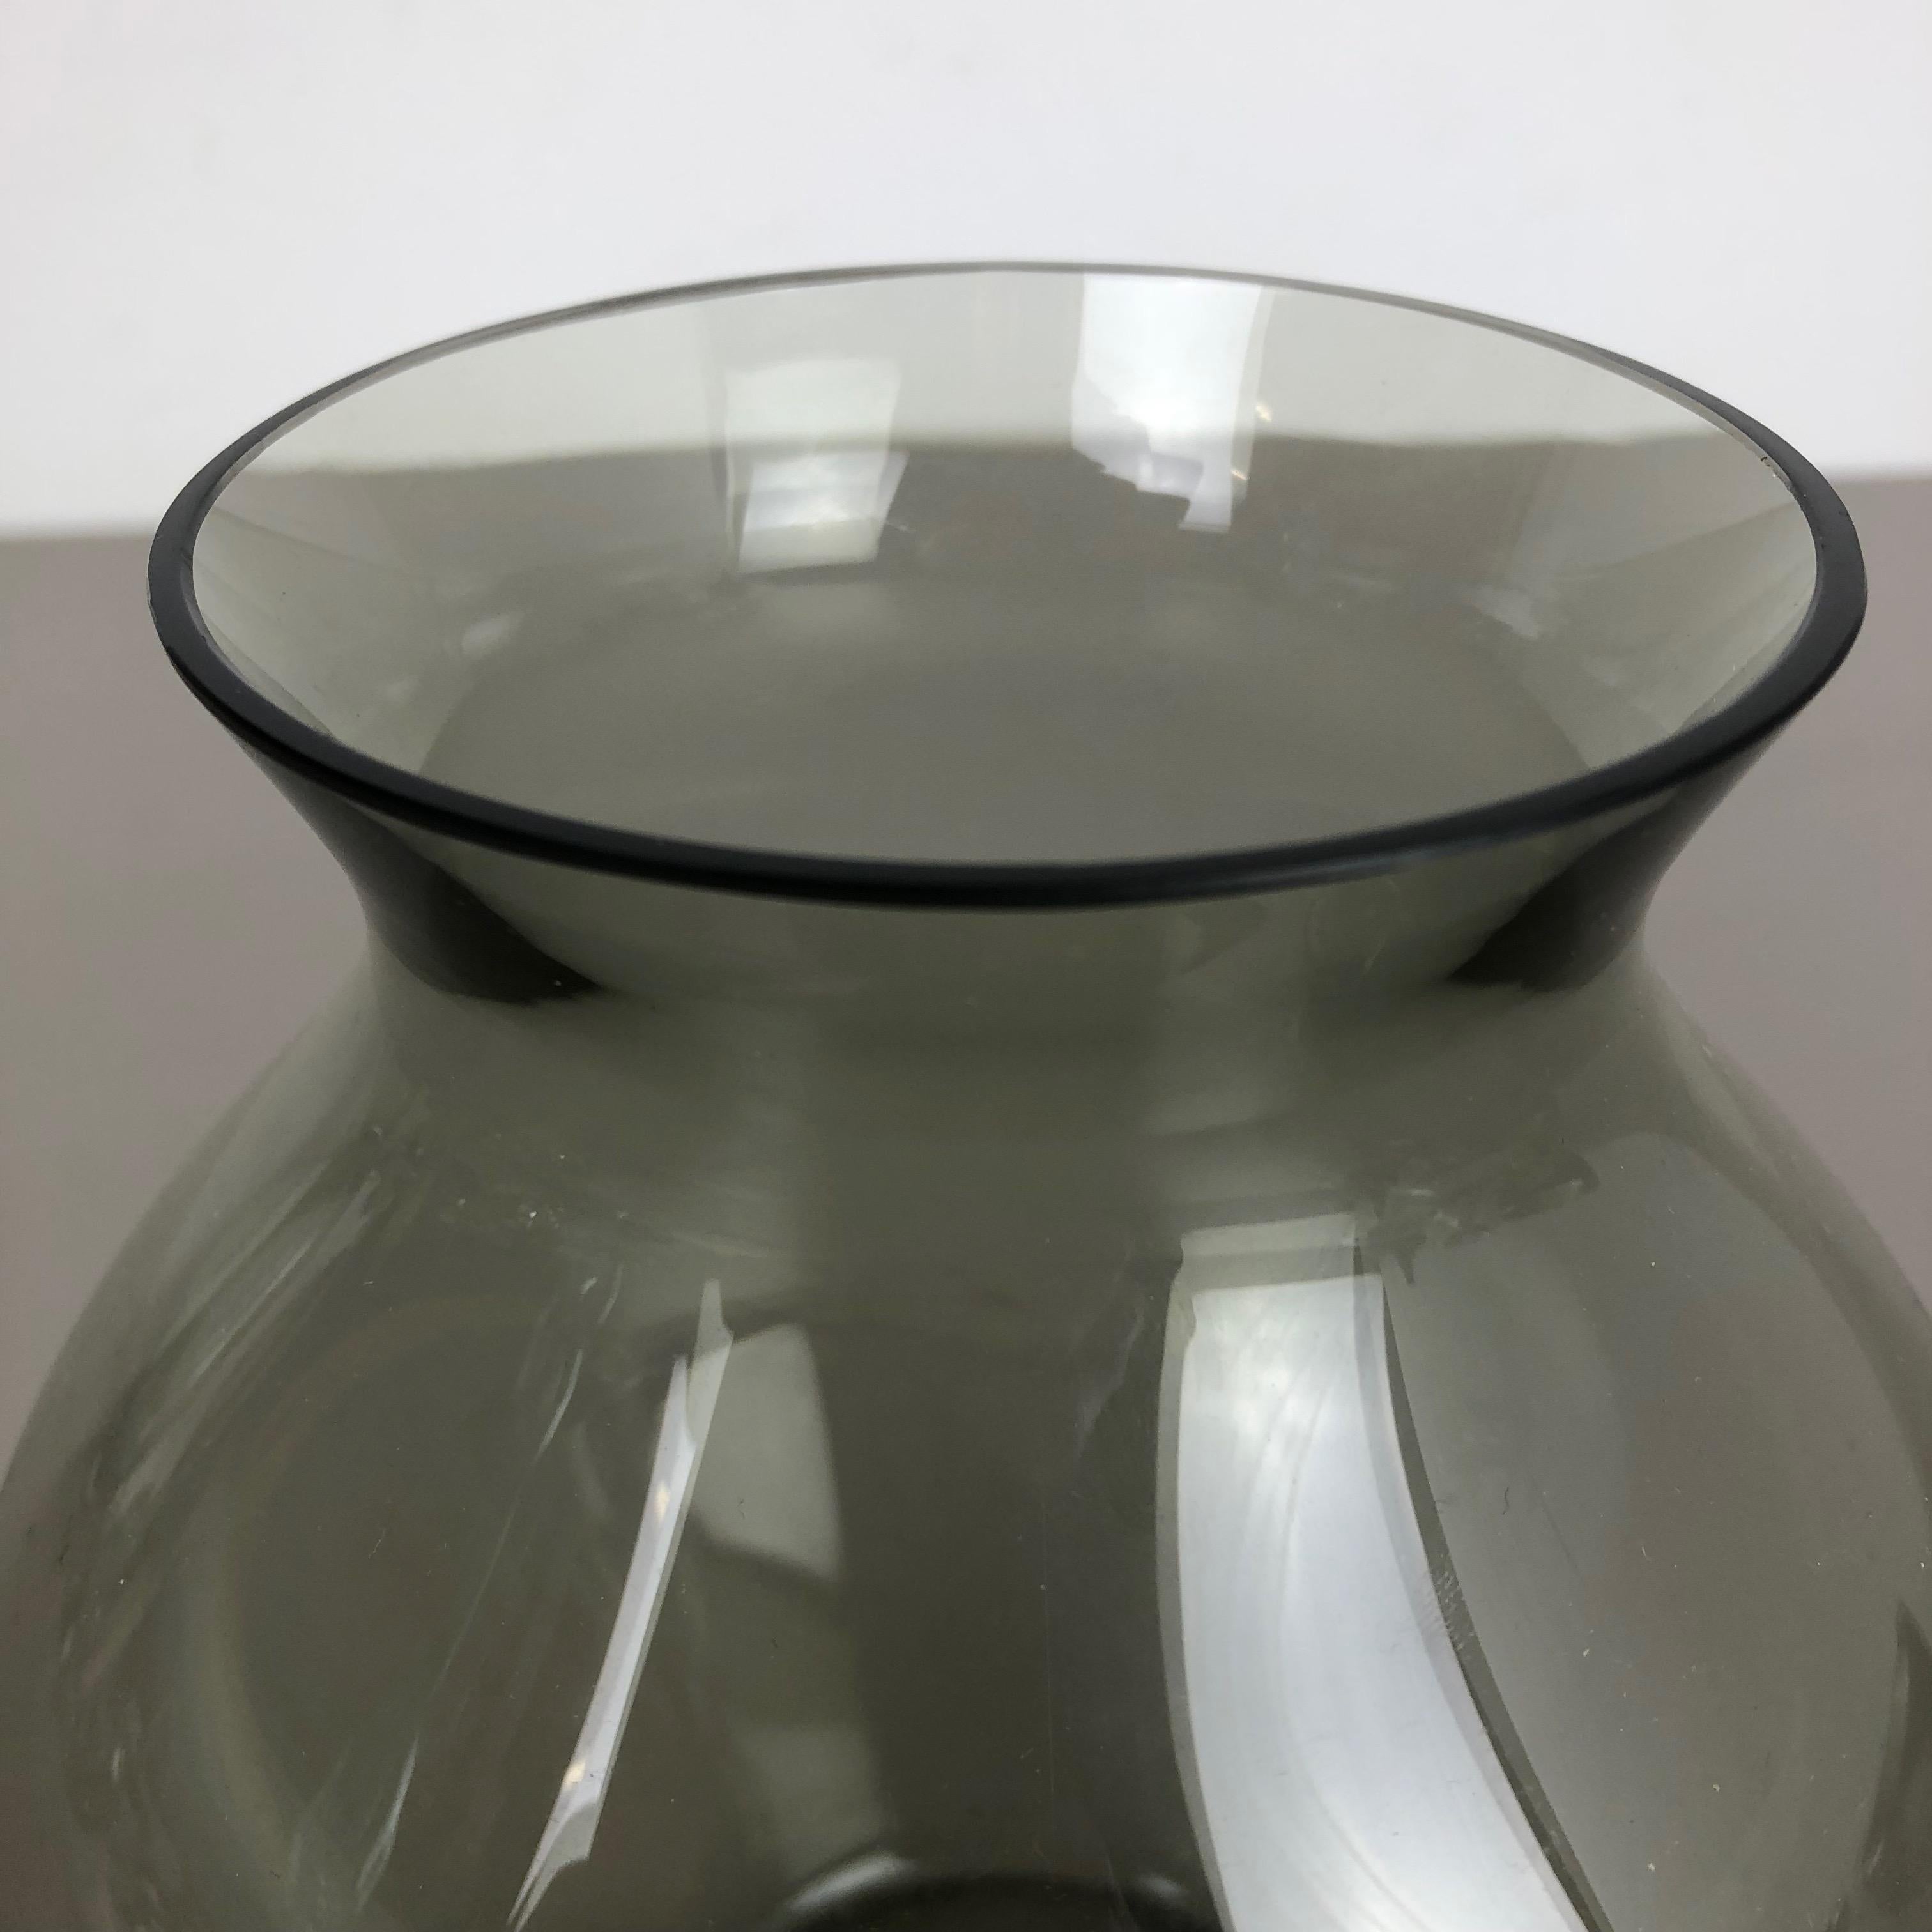 Vintage 1960s Turmalin Vase by Wilhelm Wagenfeld for WMF, Germany Bauhaus For Sale 2